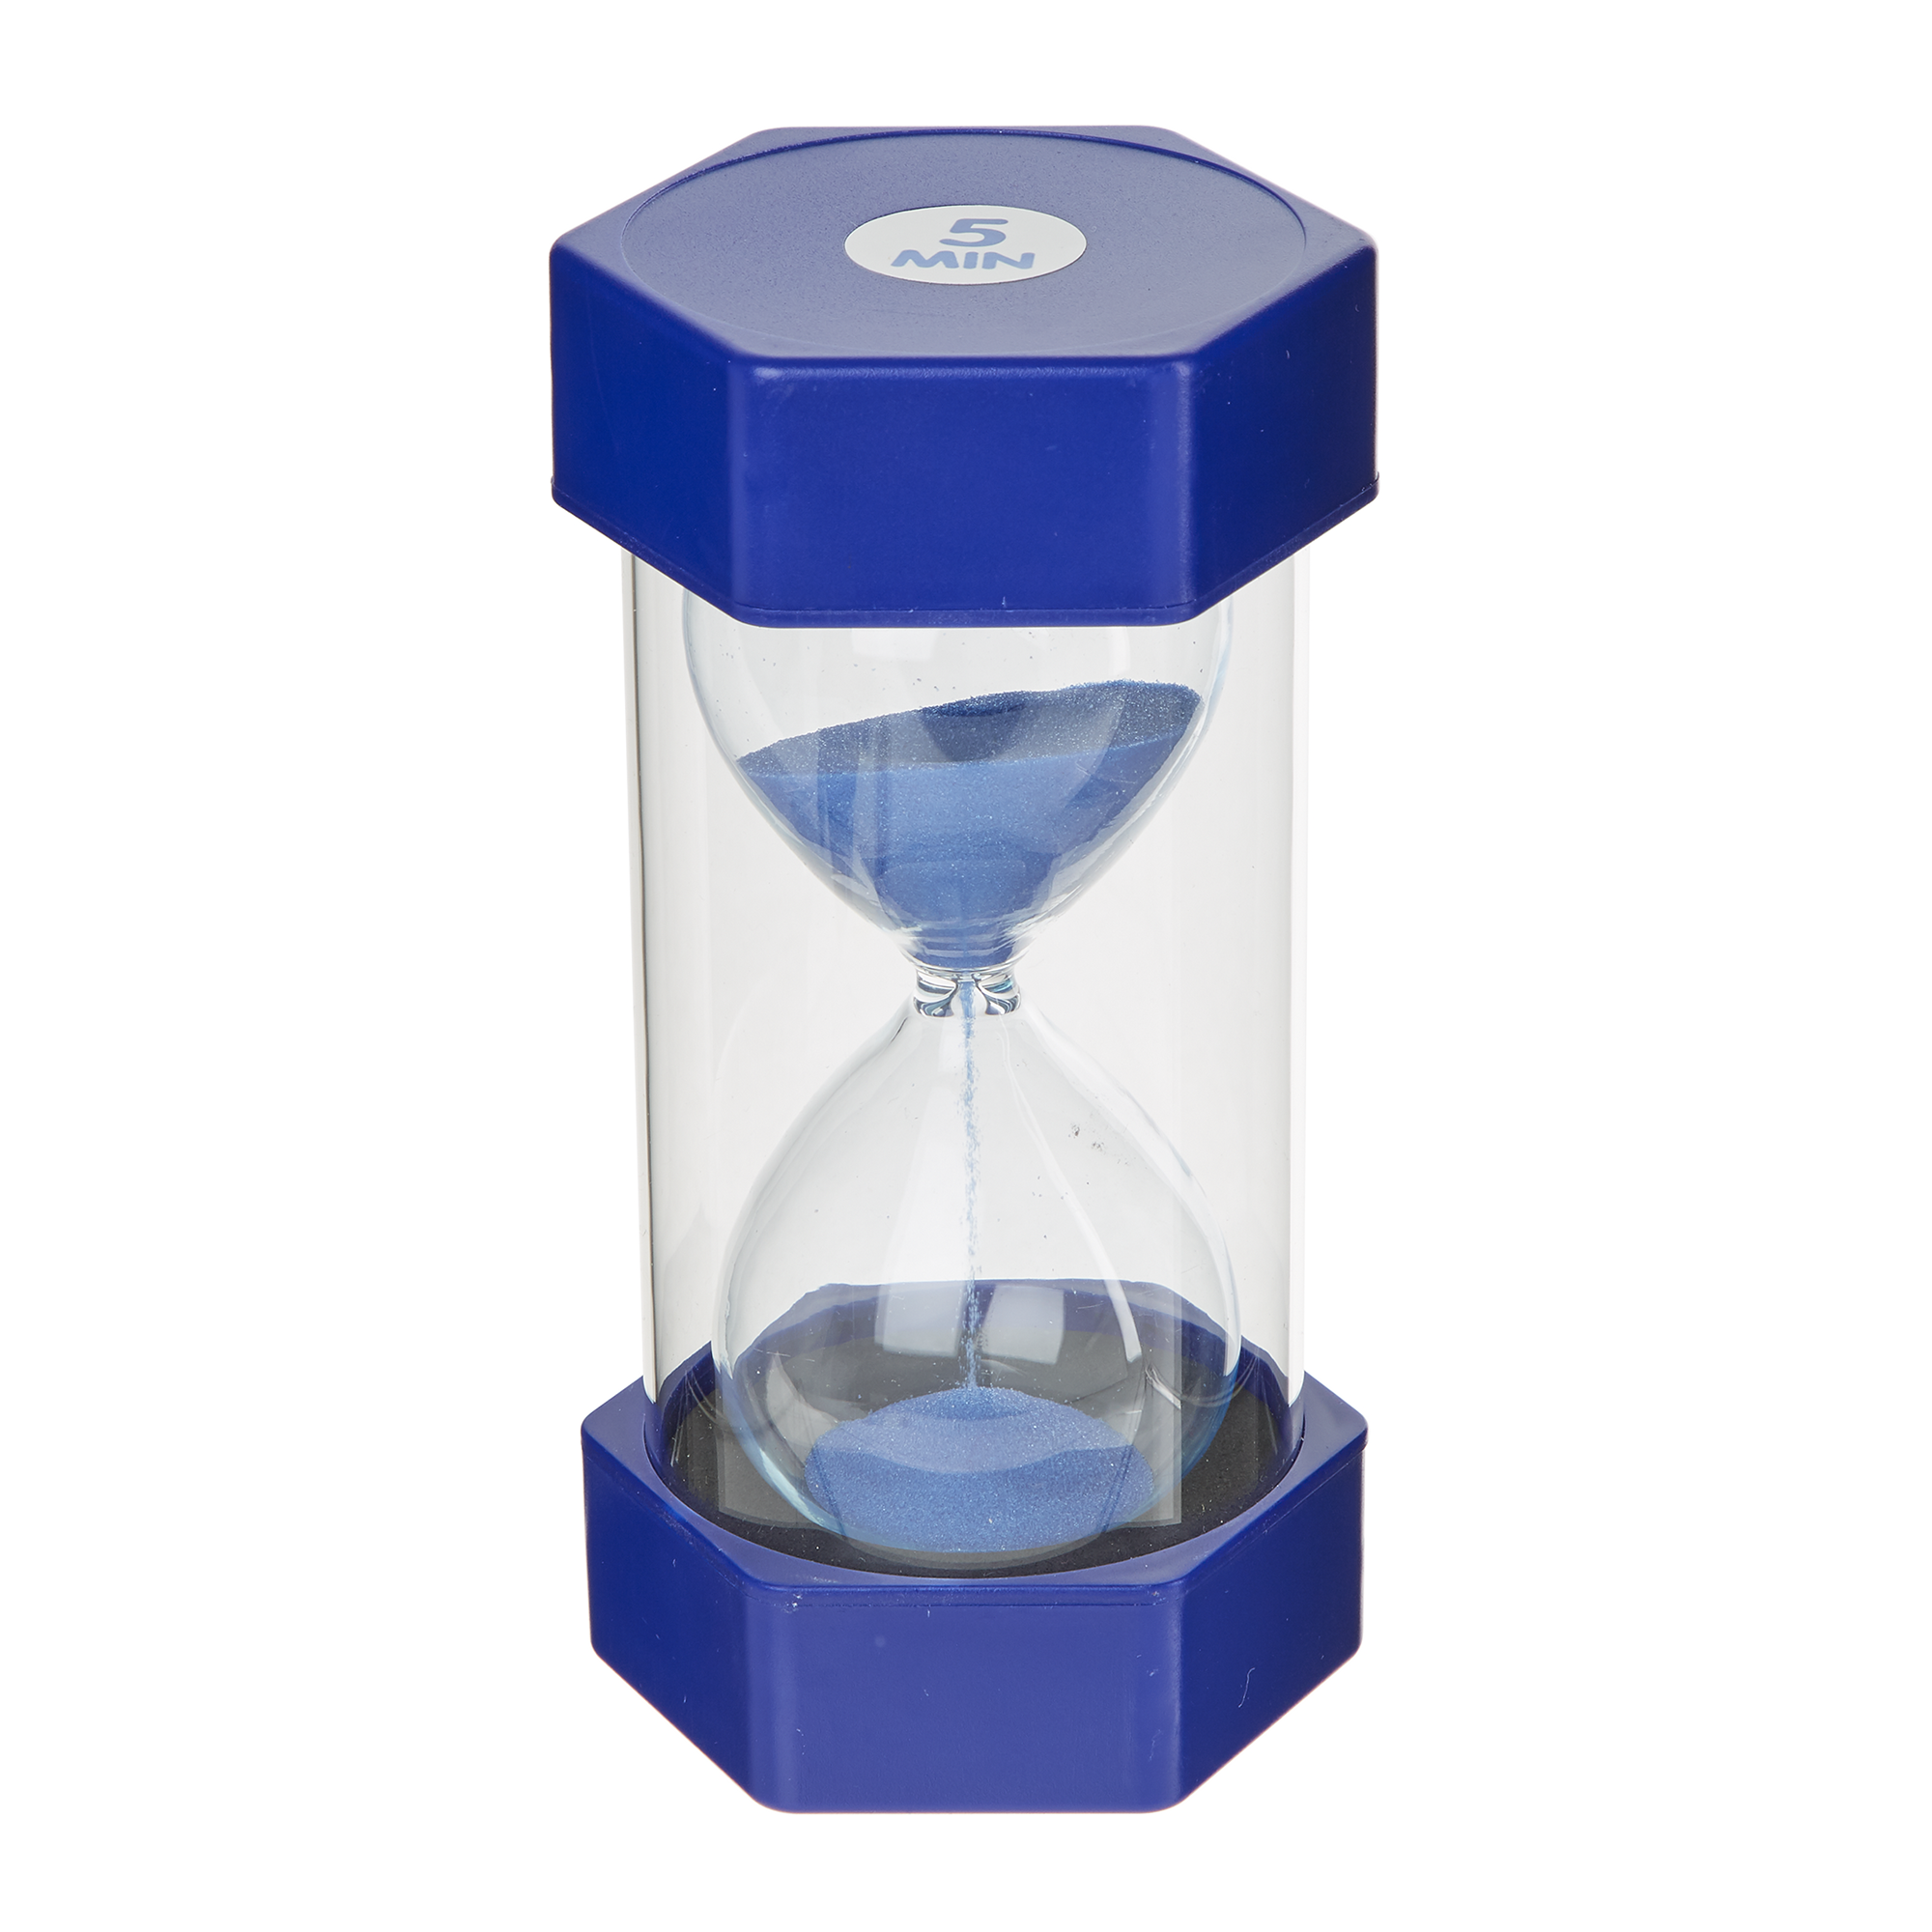 the sand timer